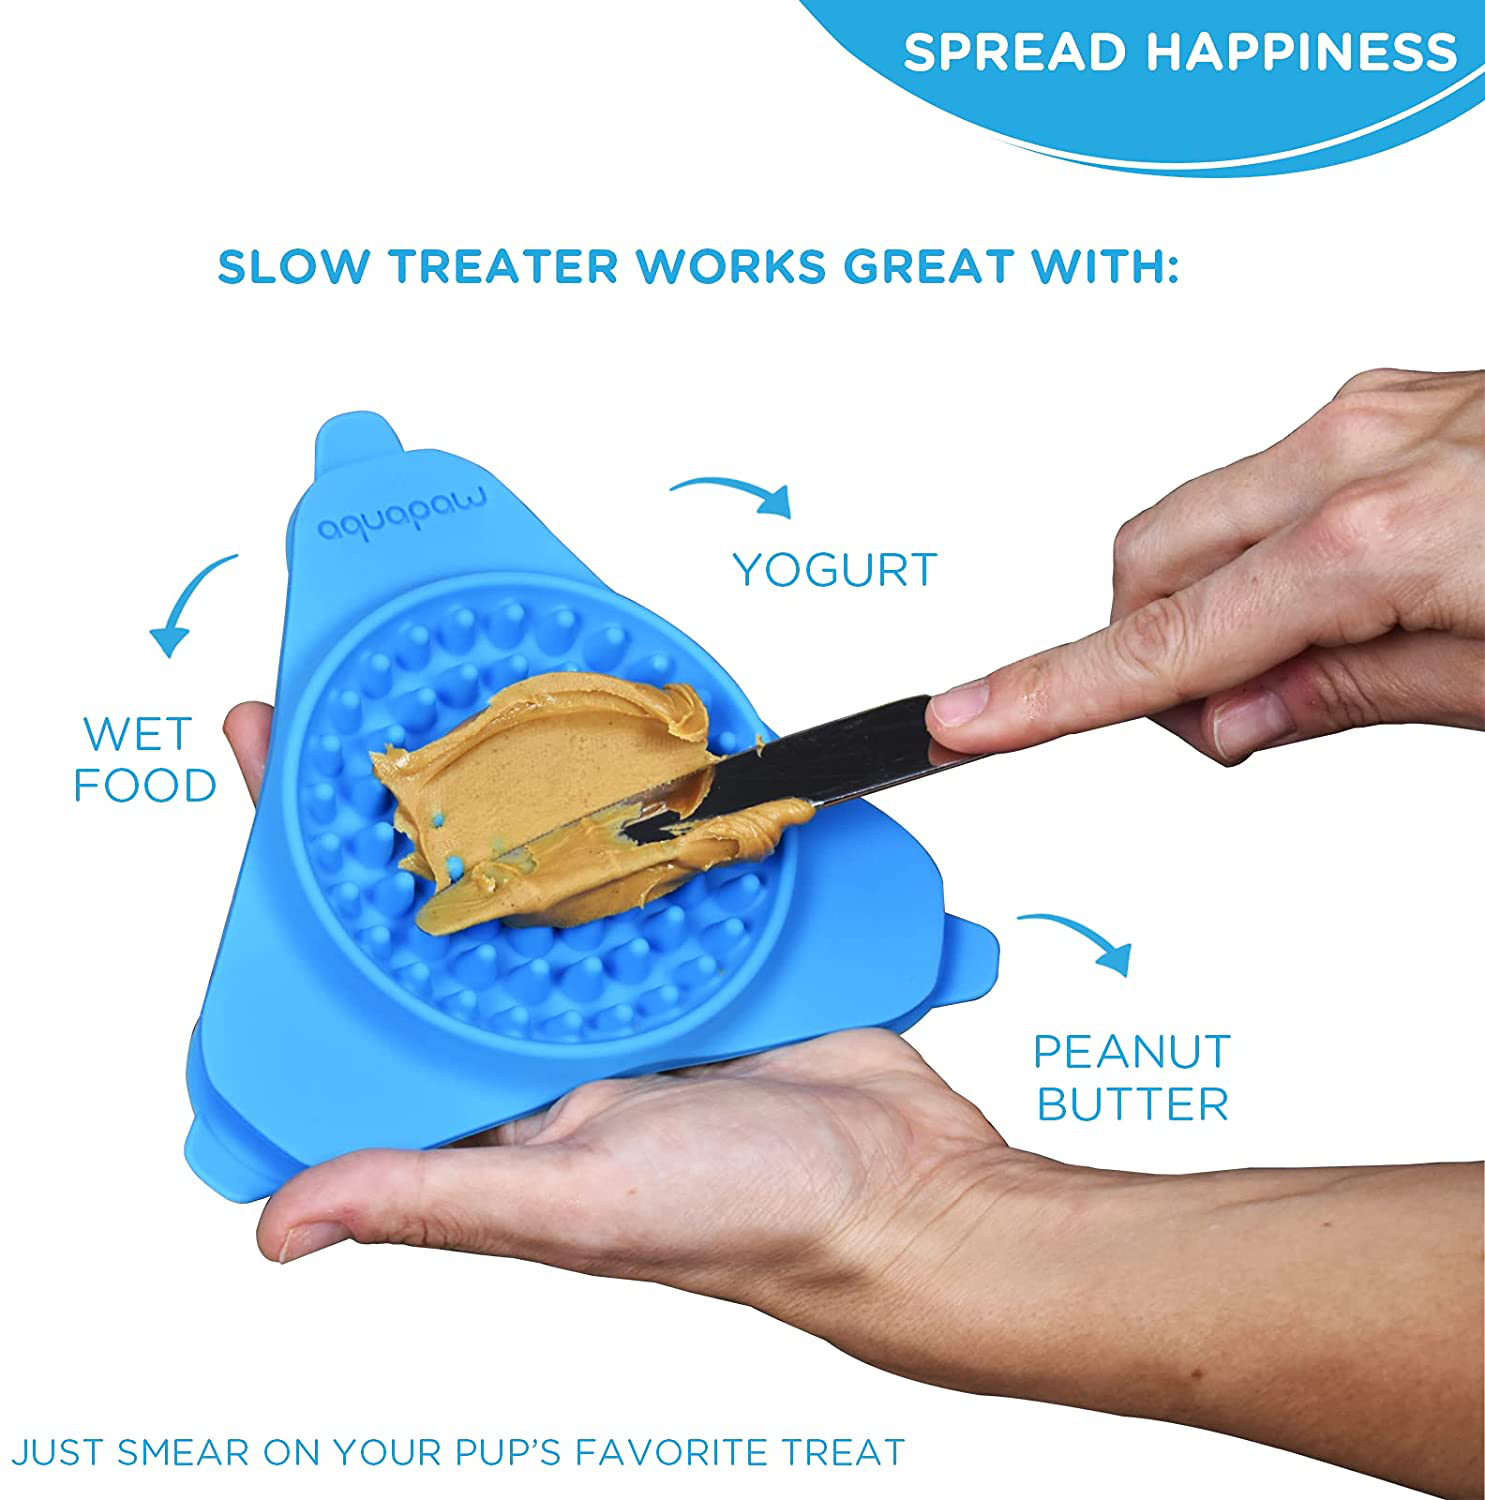 Aquapaw Slow Treater Treat-Dispensing Licky Mat – Puzzle Feeder Toy/Licking Pad for Dogs & Other Large Pets, Suctions to Wall or Floor – Relieves Boredom & Anxiety during Grooming, Vet Visits & Storms Animals & Pet Supplies > Pet Supplies > Dog Supplies > Dog Treadmills Aquapaw   